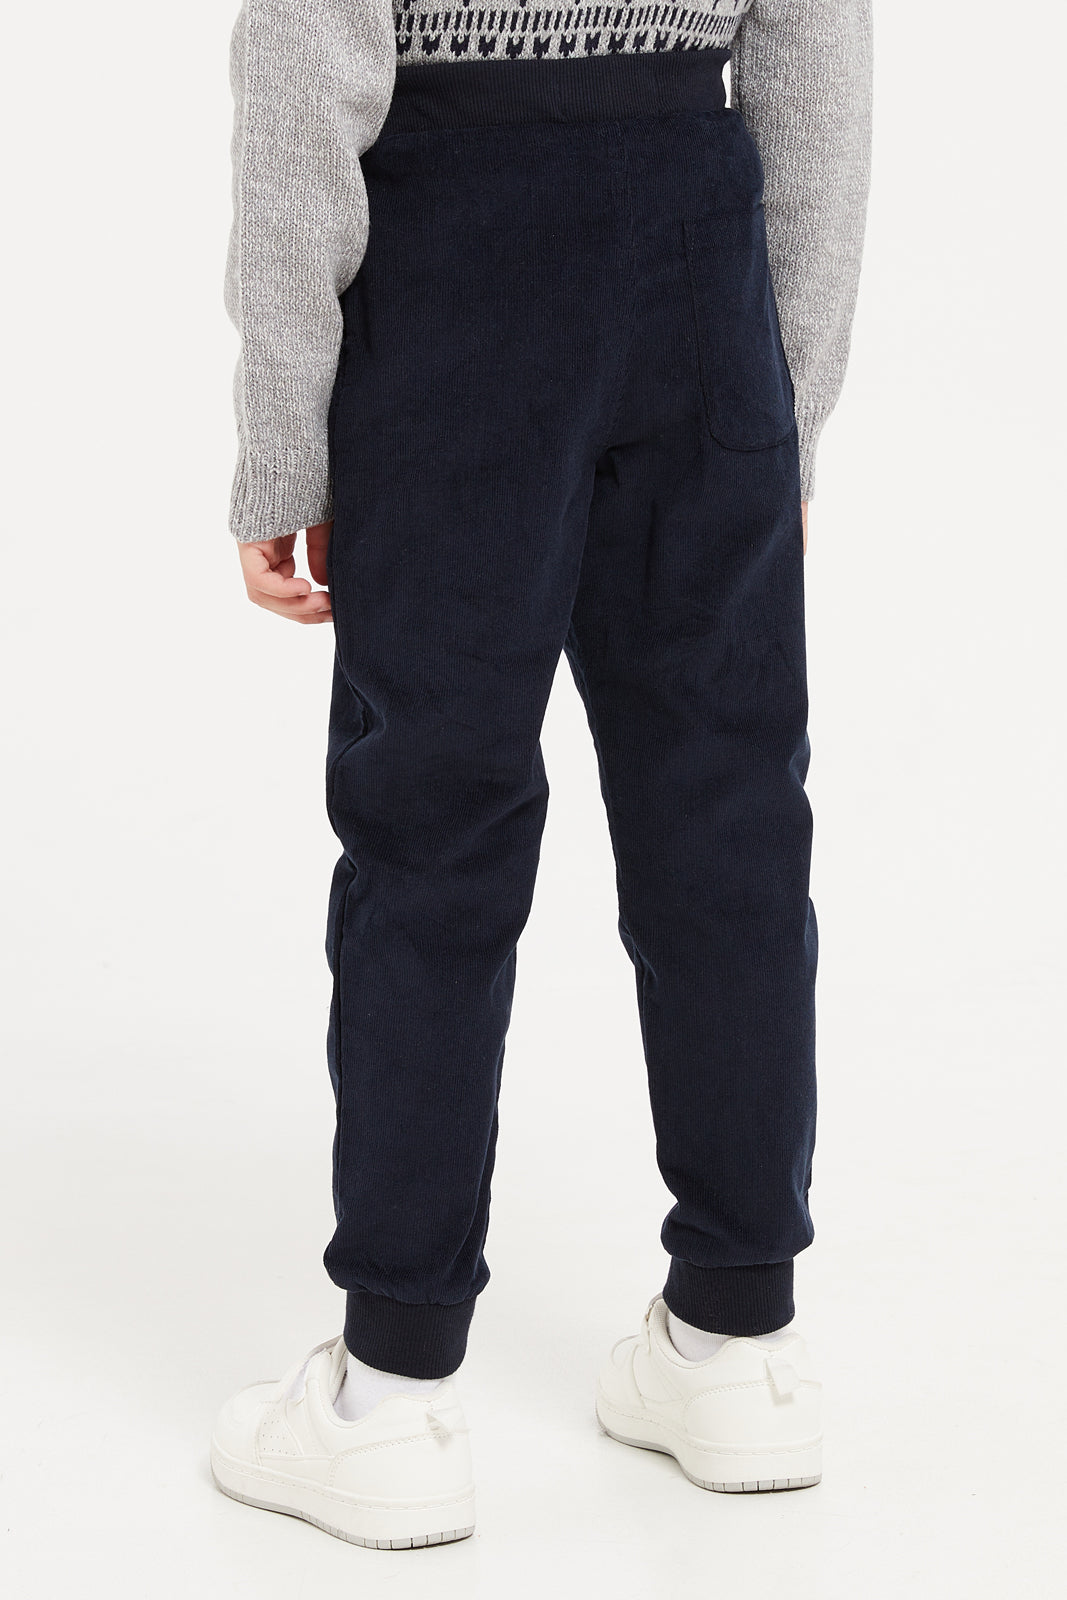 Men's Corduroy Pull-On Pant, Men's Clearance